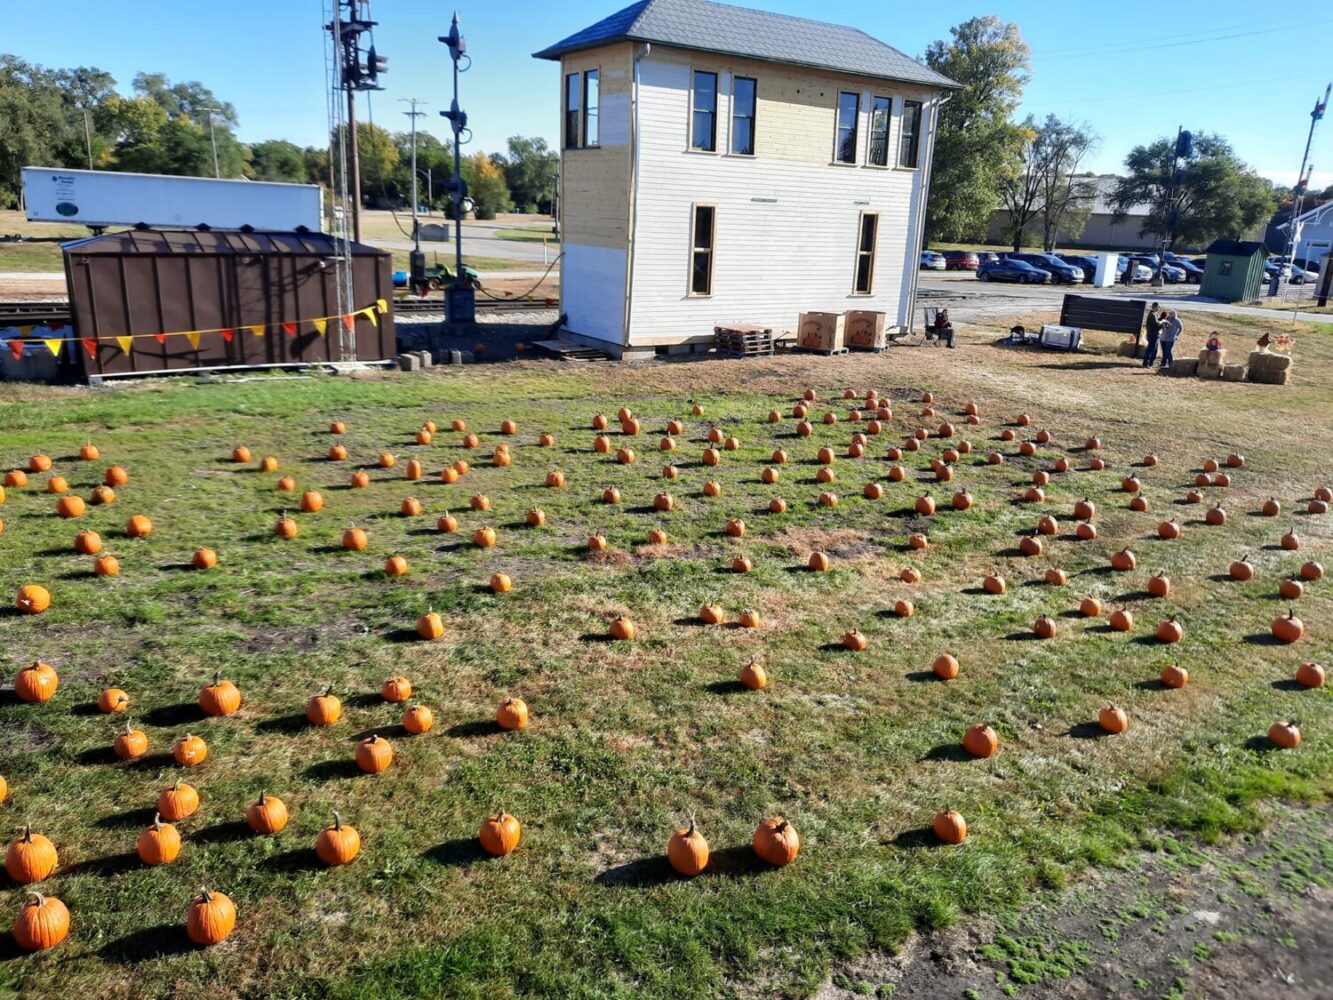 All Aboard The Pumpkin Train – Travel by Train to the Pumpkin Patch